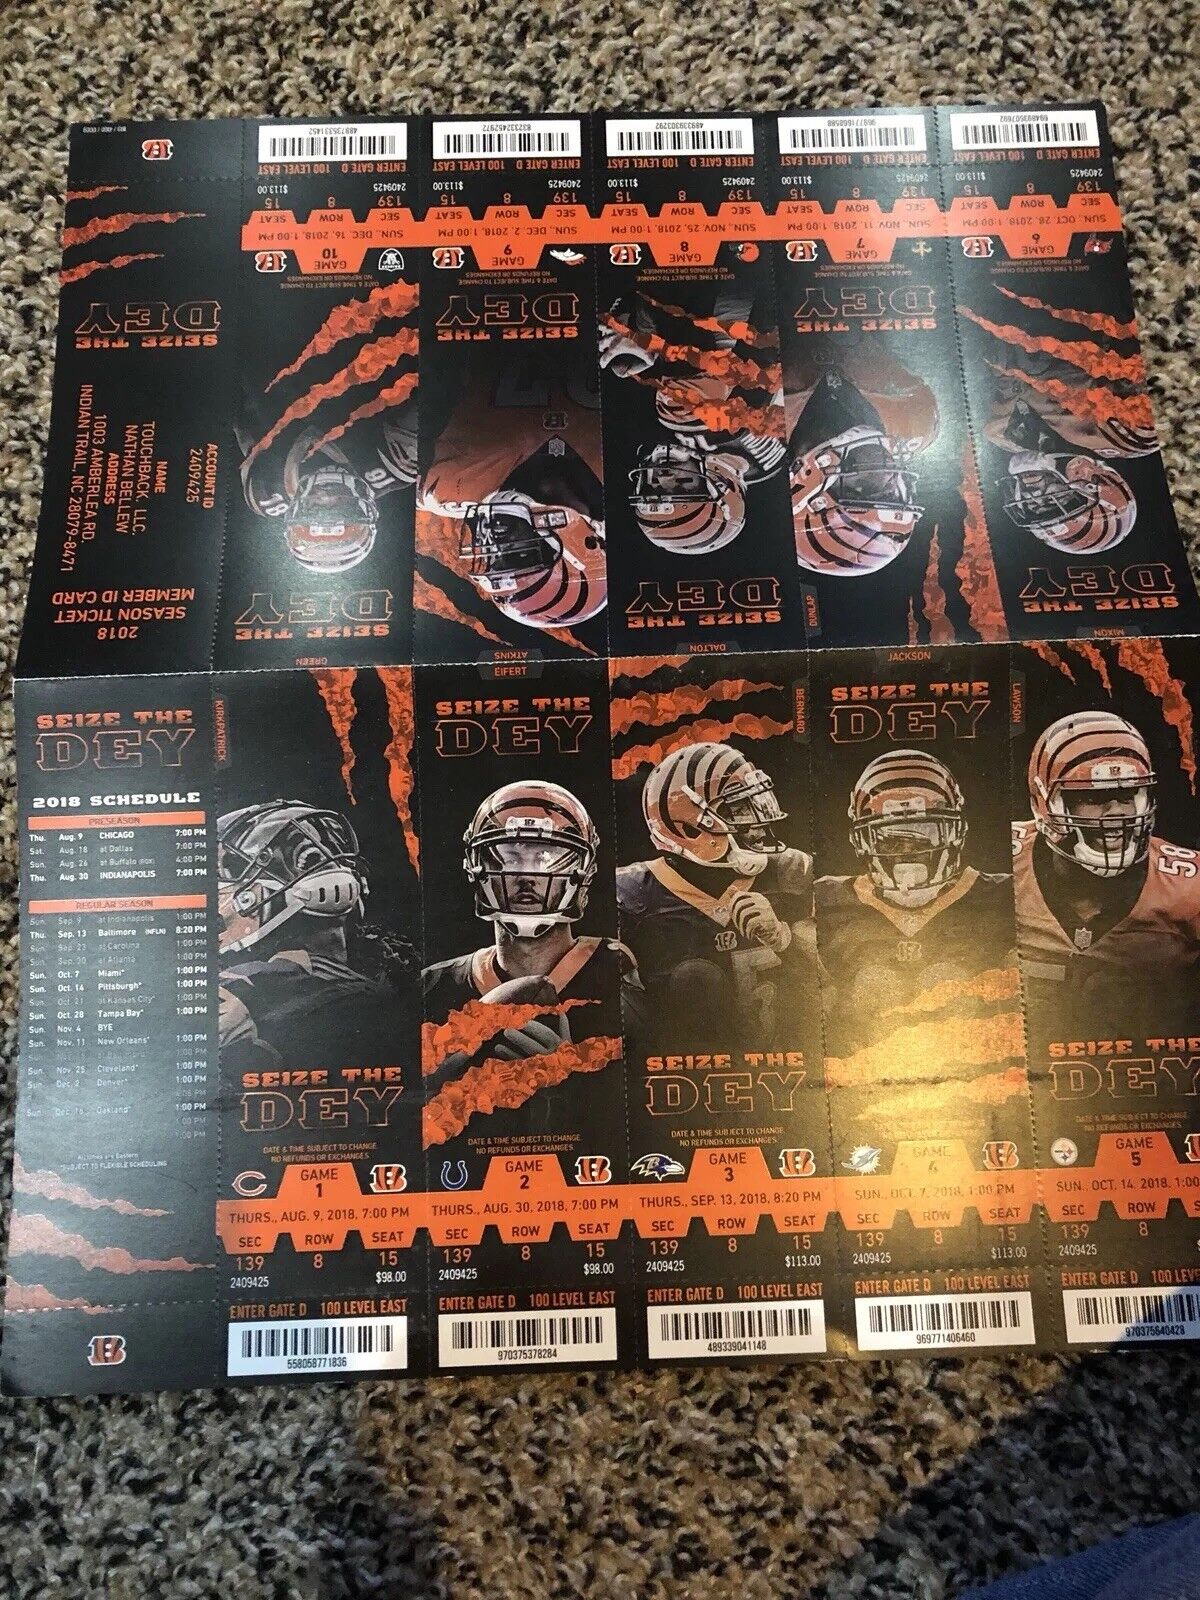 bengals tickets for sunday